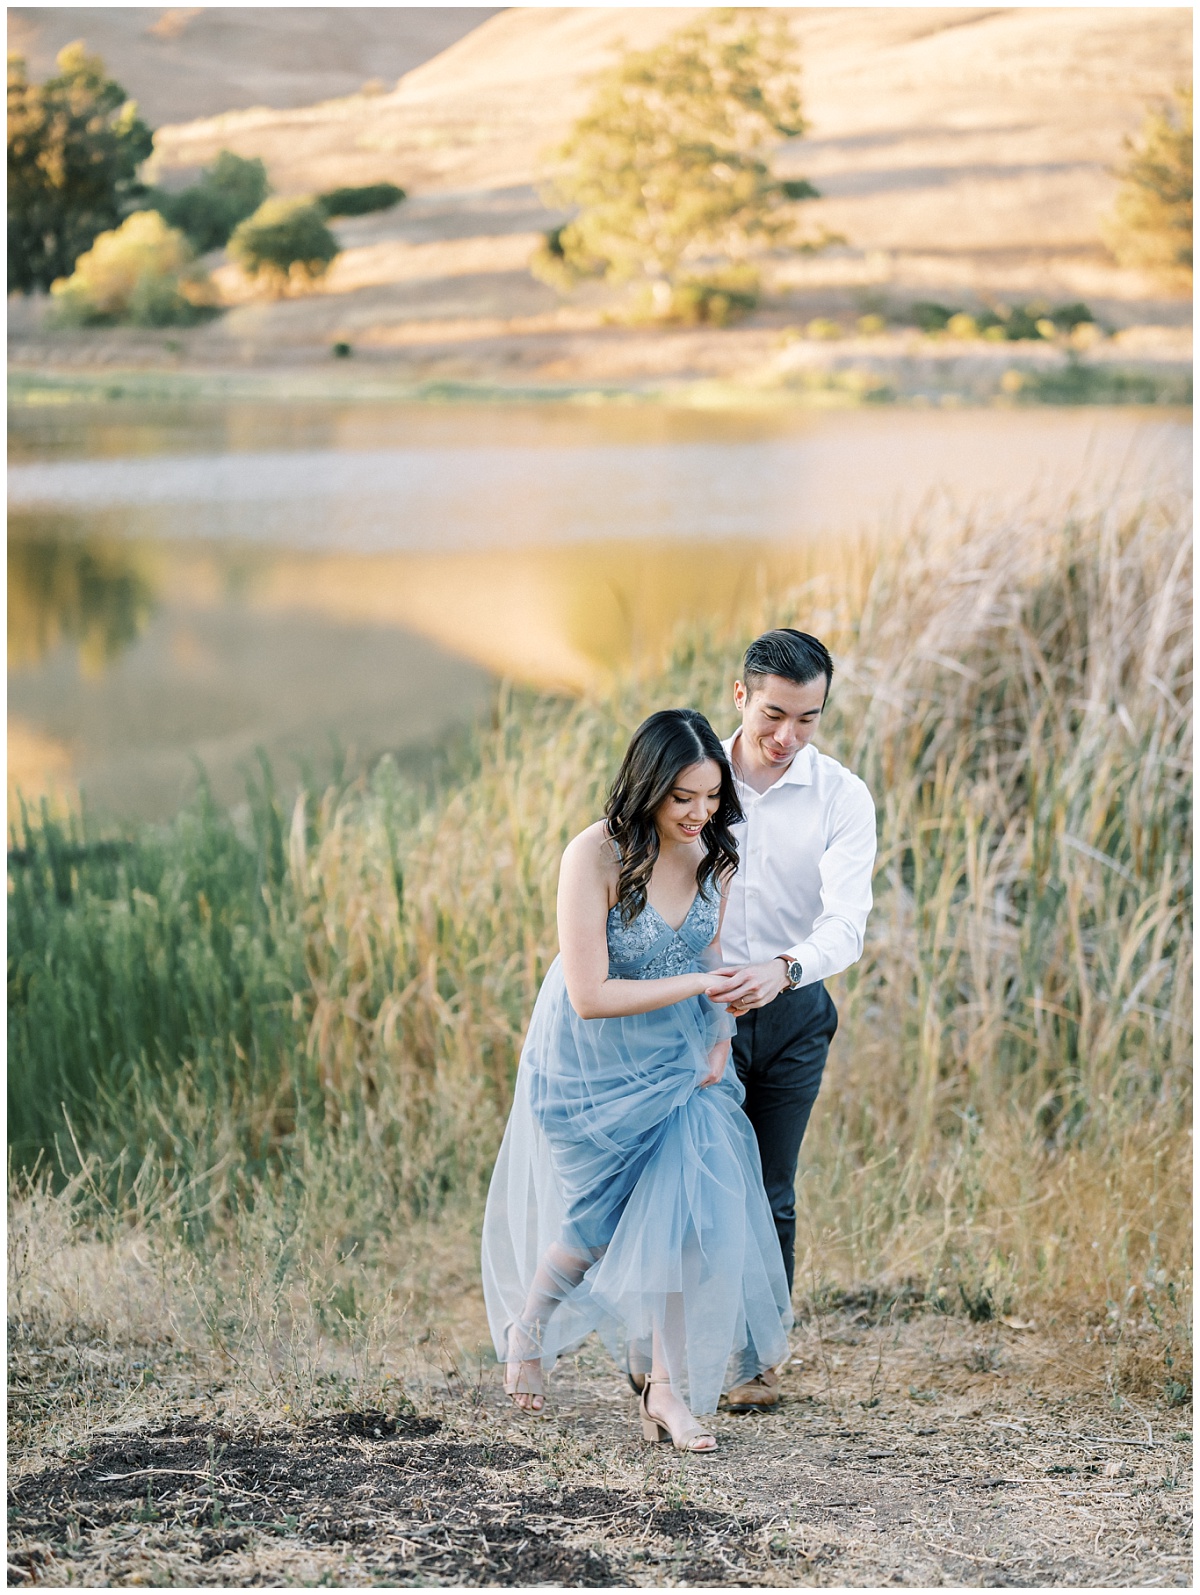 Engagement Session Outfit Ideas